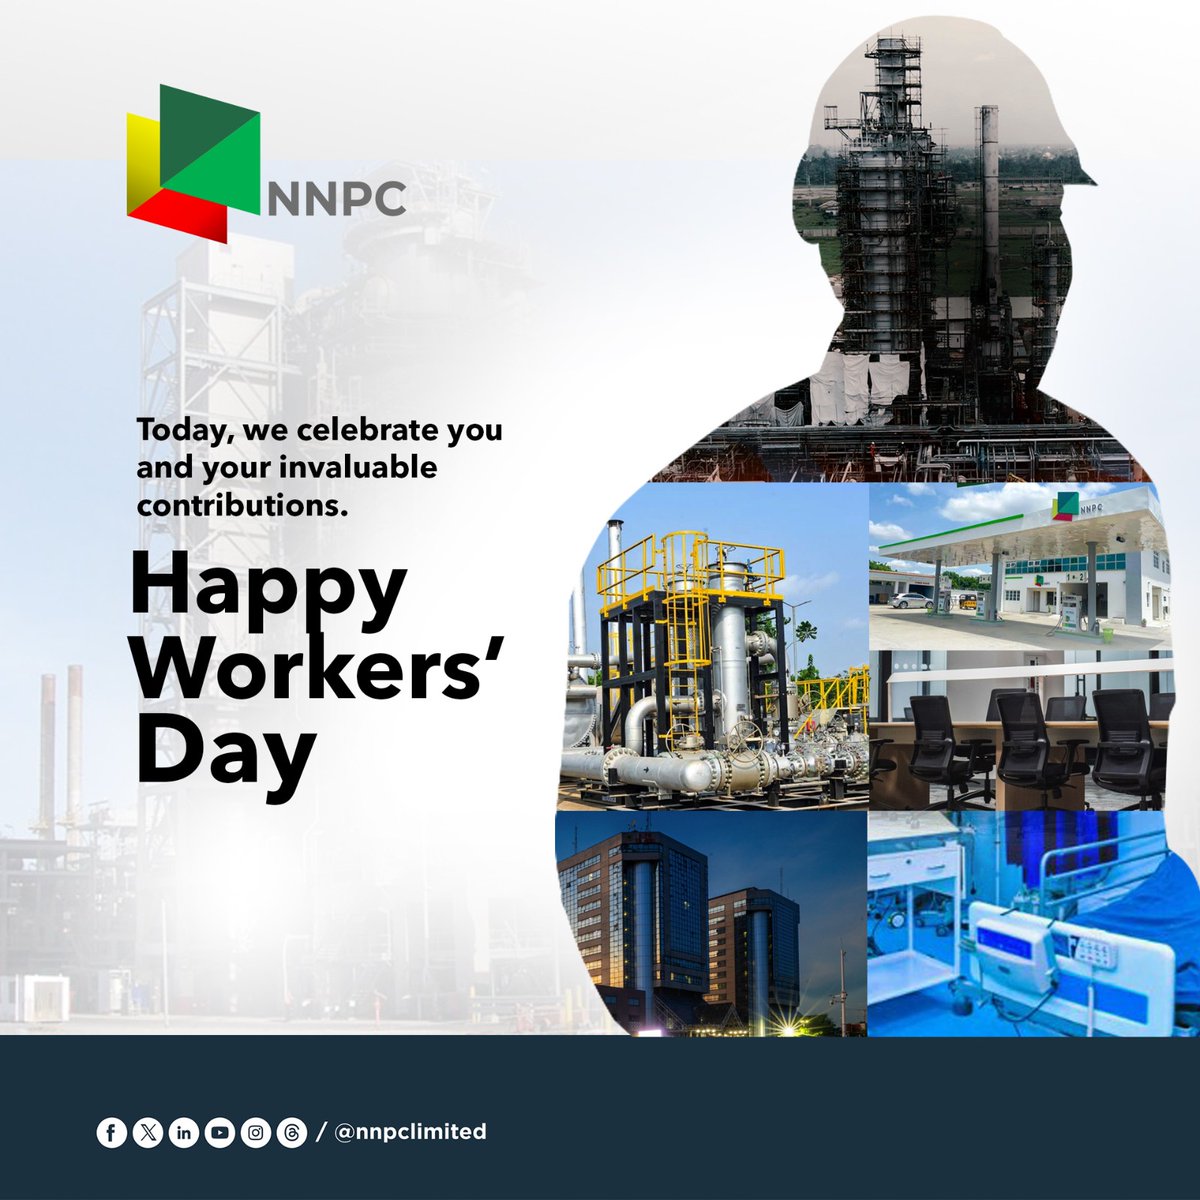 Today, we celebrate you and your invaluable contributions. From all of us at #NNPCLimited, Happy Workers' Day! #WorkersDay #EnergyforToday #EnergyforTomorrow